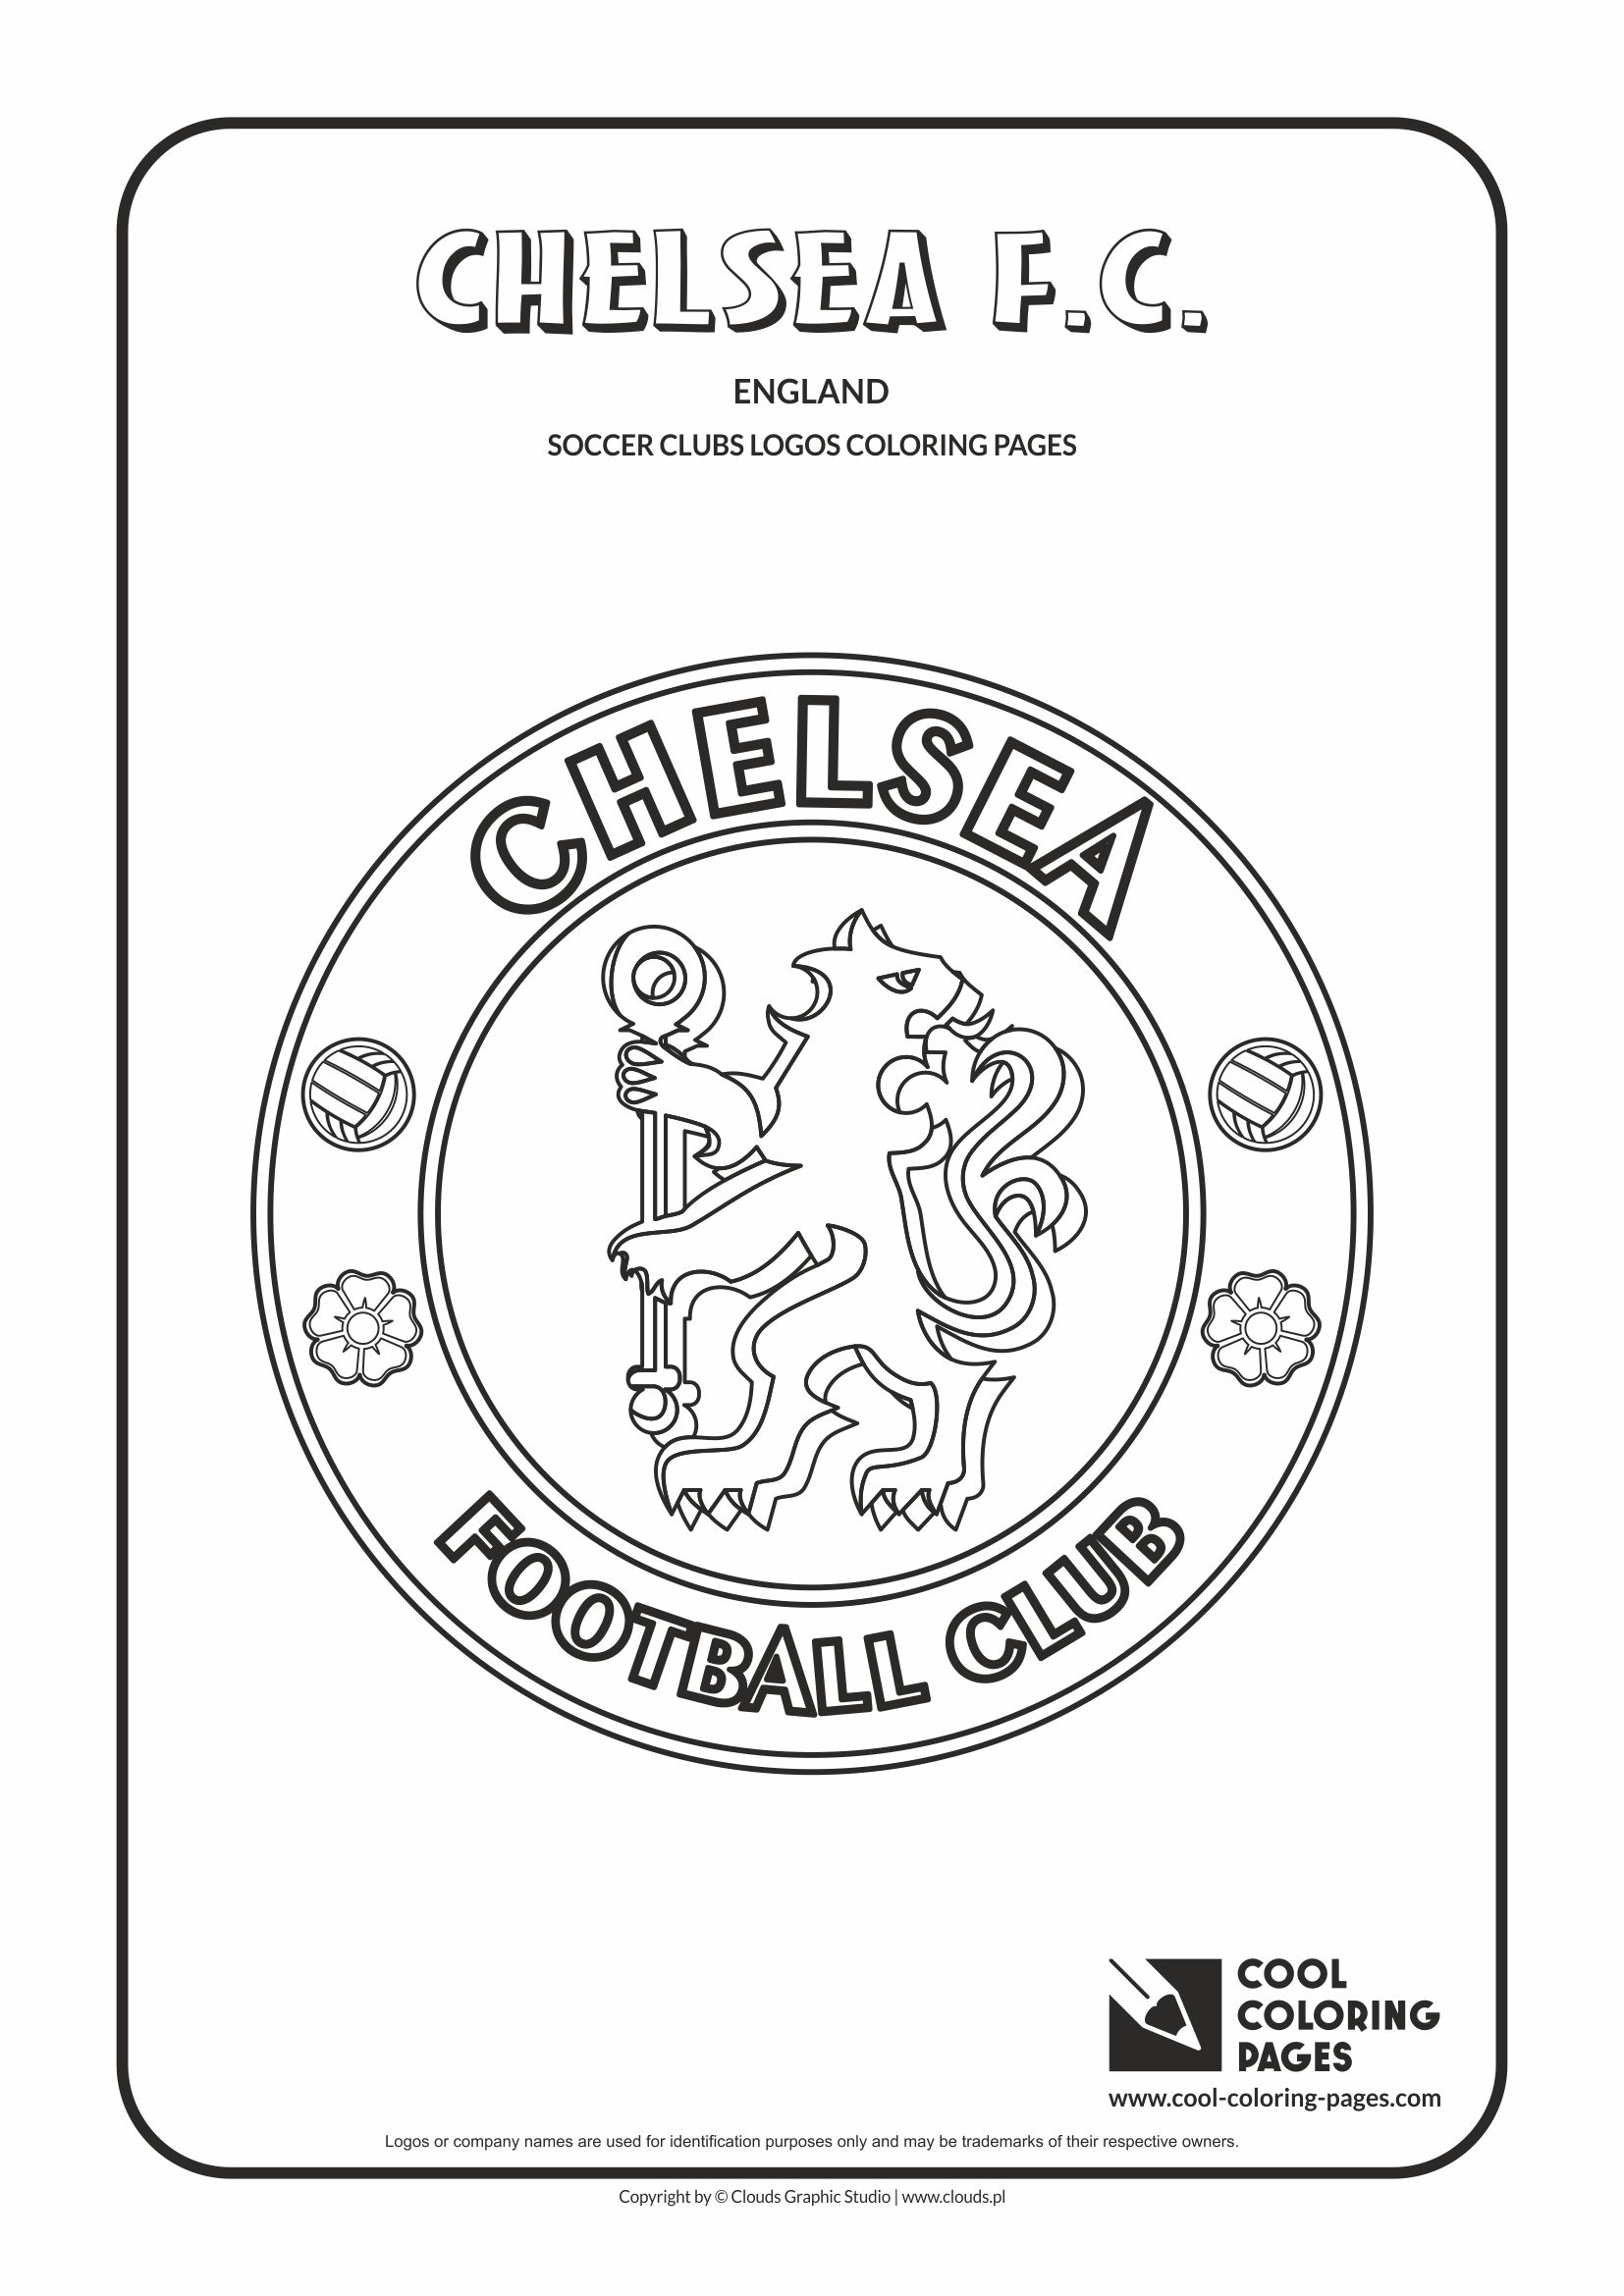 Cool Coloring Pages Soccer clubs logos - Cool Coloring Pages ...